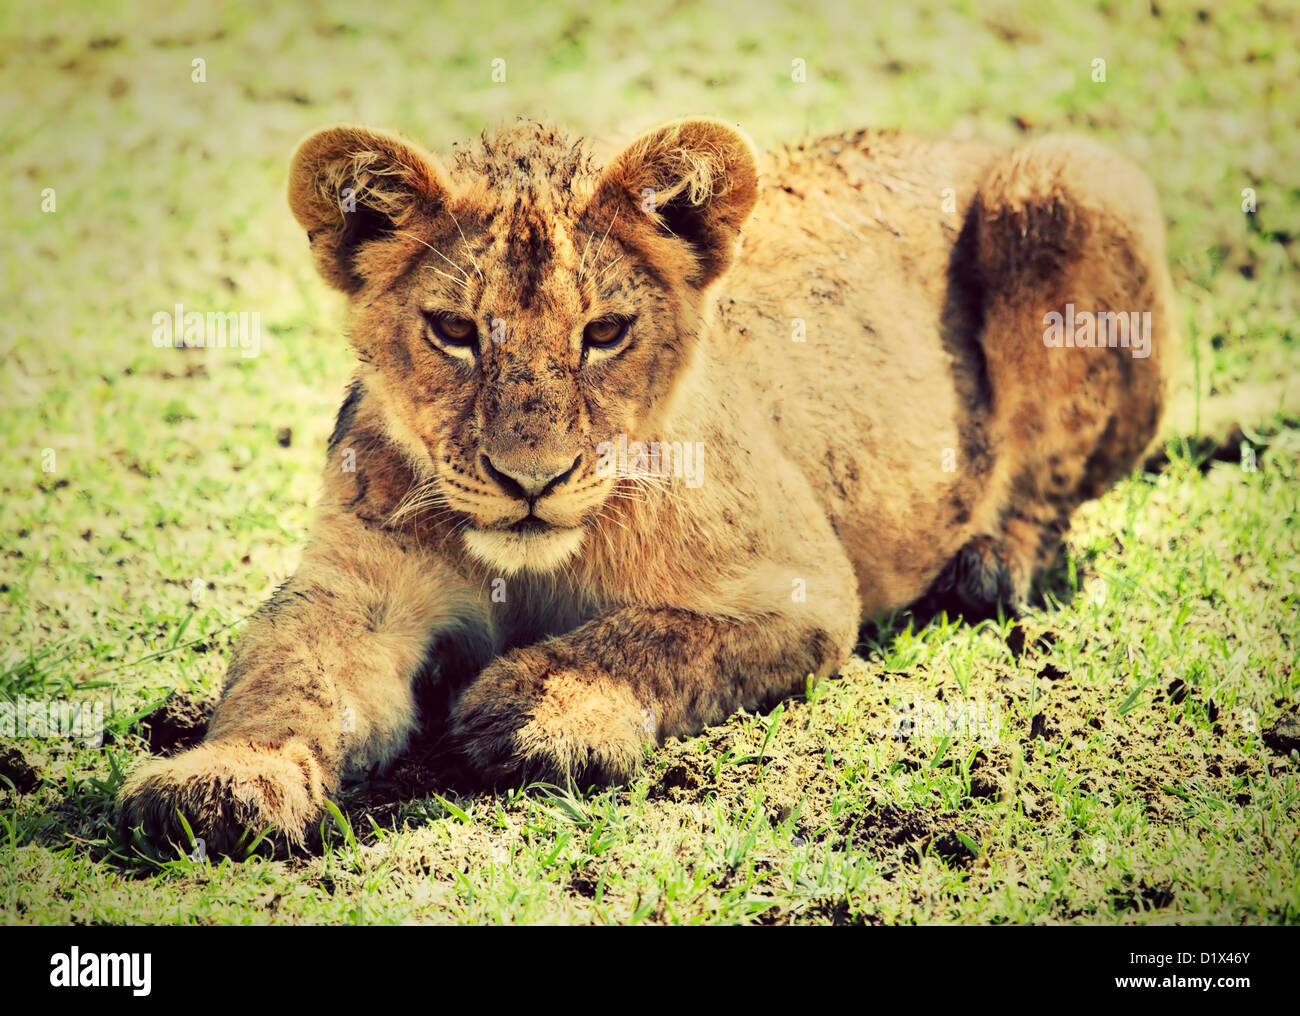 A small lion cub in the Ngorongoro crater in Tanzania, Africa. Stock Photo